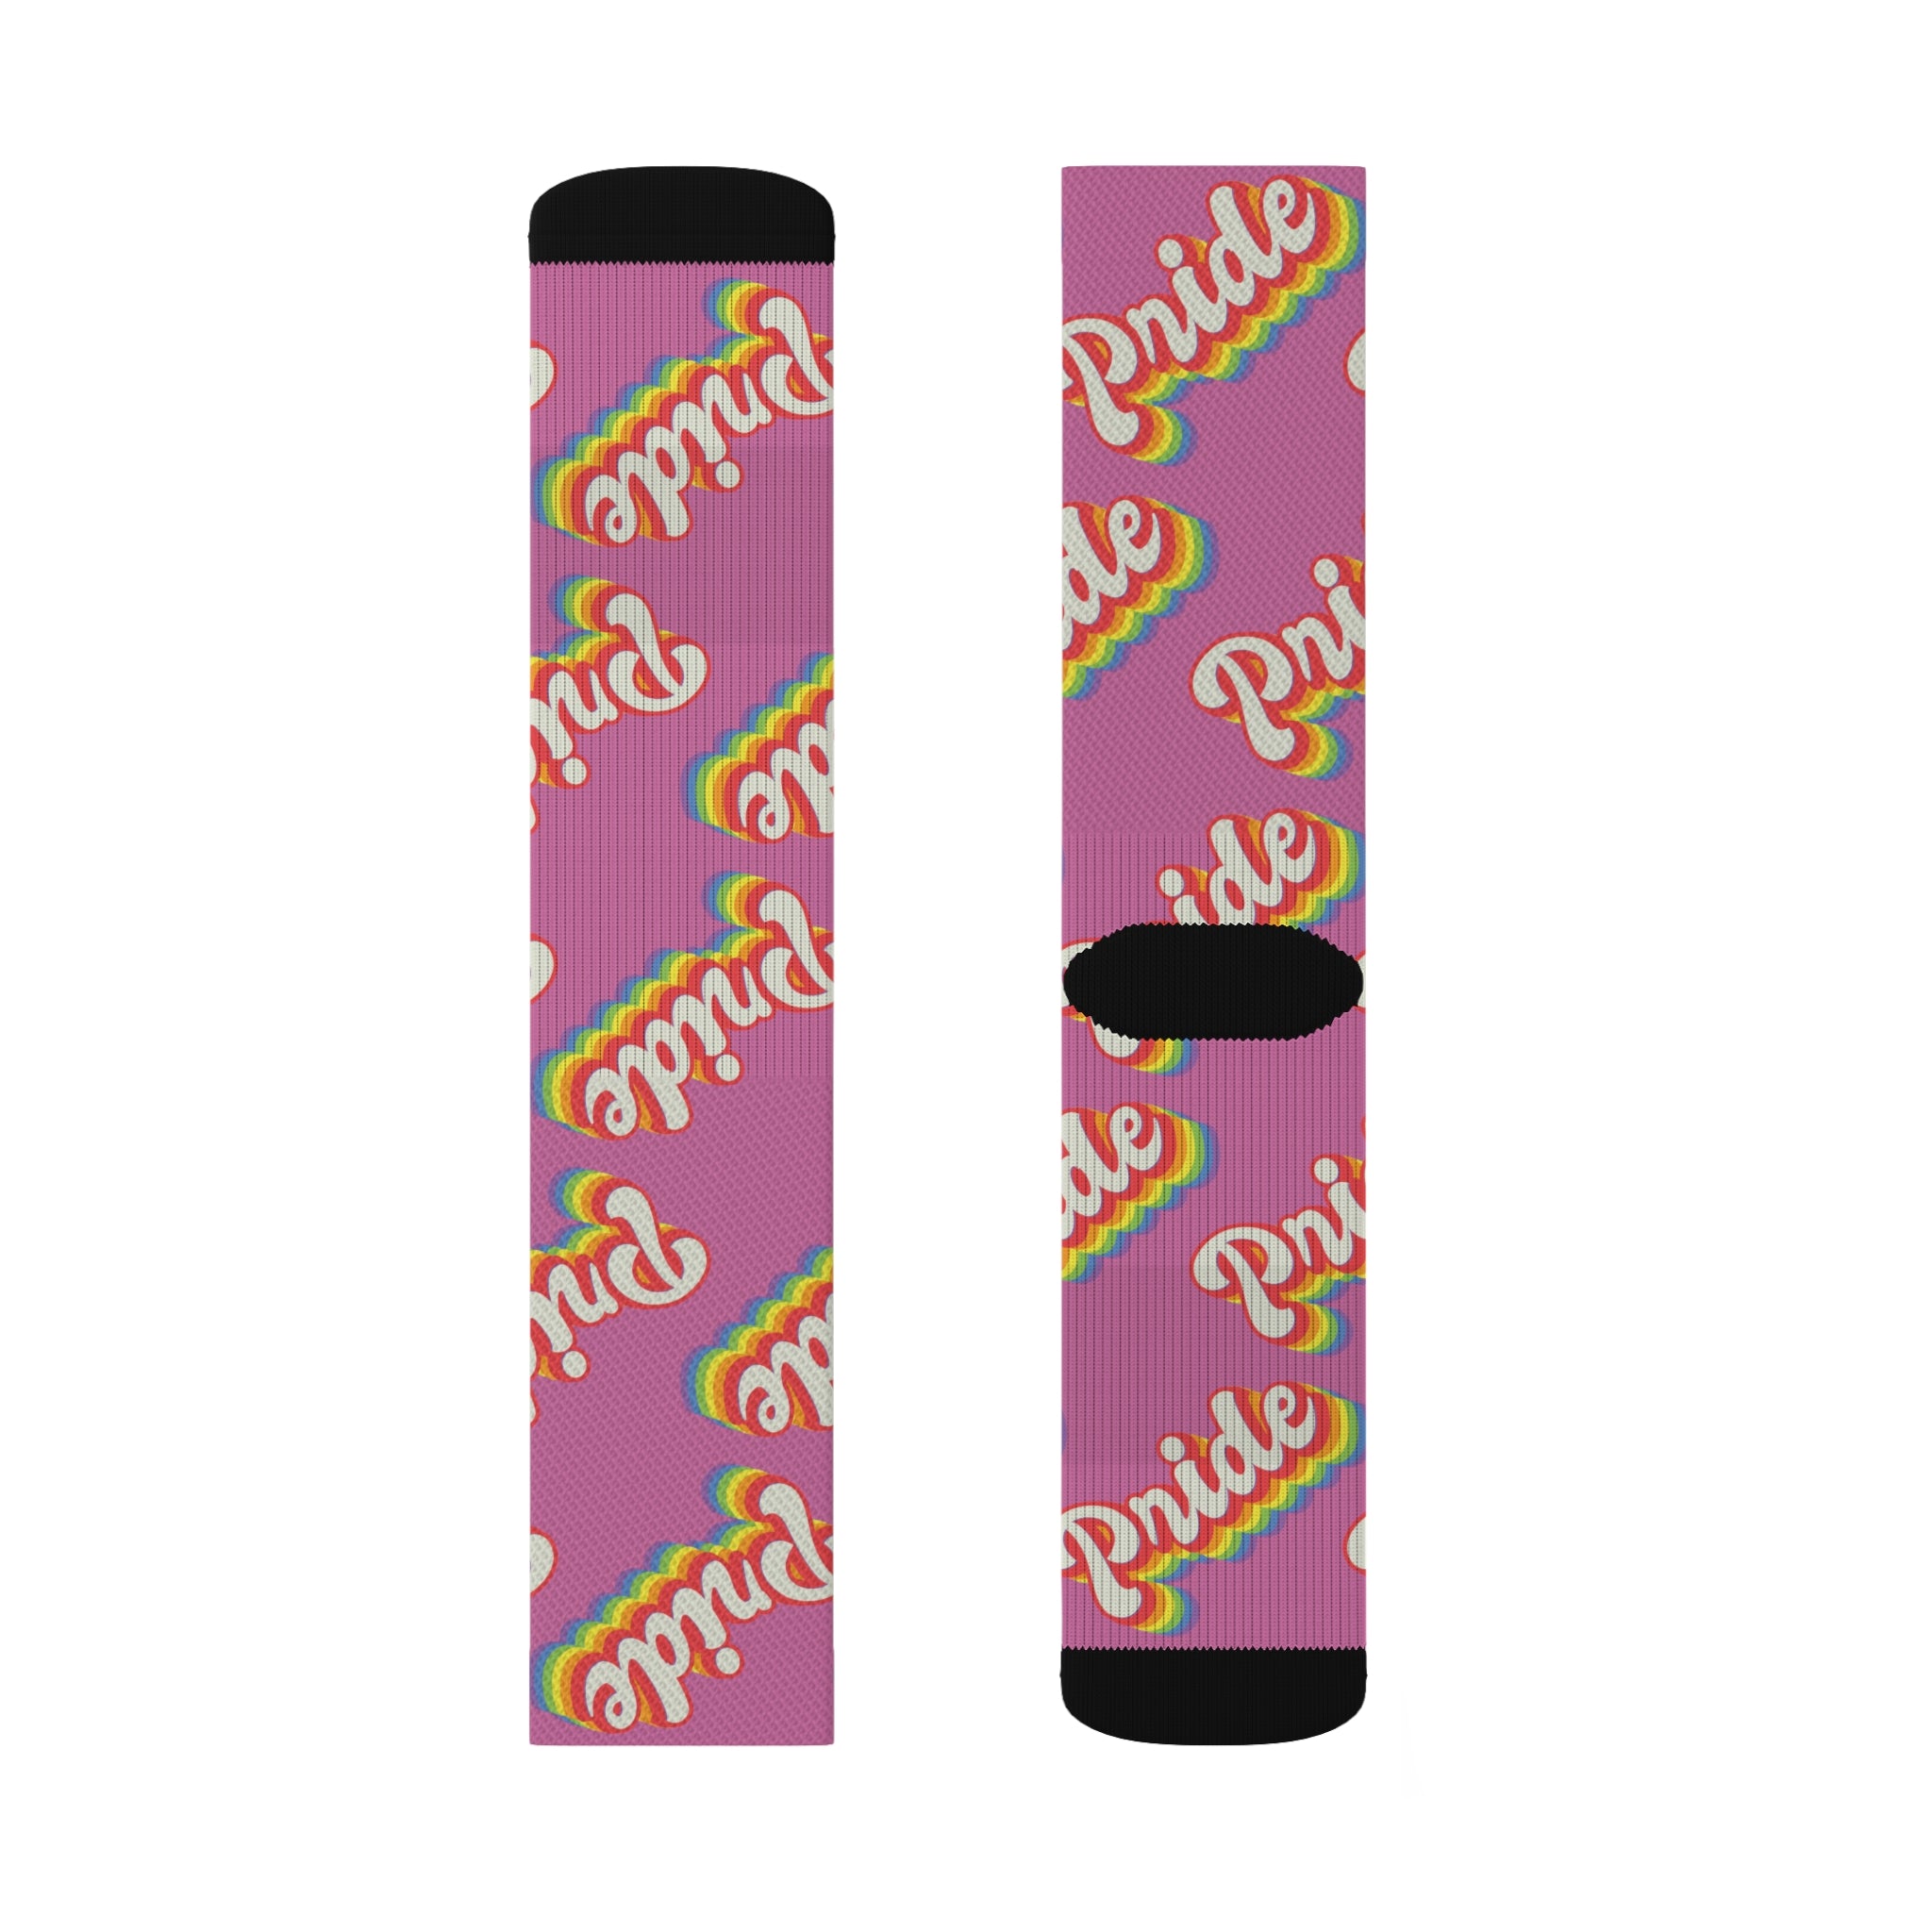 Description: A pair of Pride Socks with a sublimated print of the word 'pretty' on them.